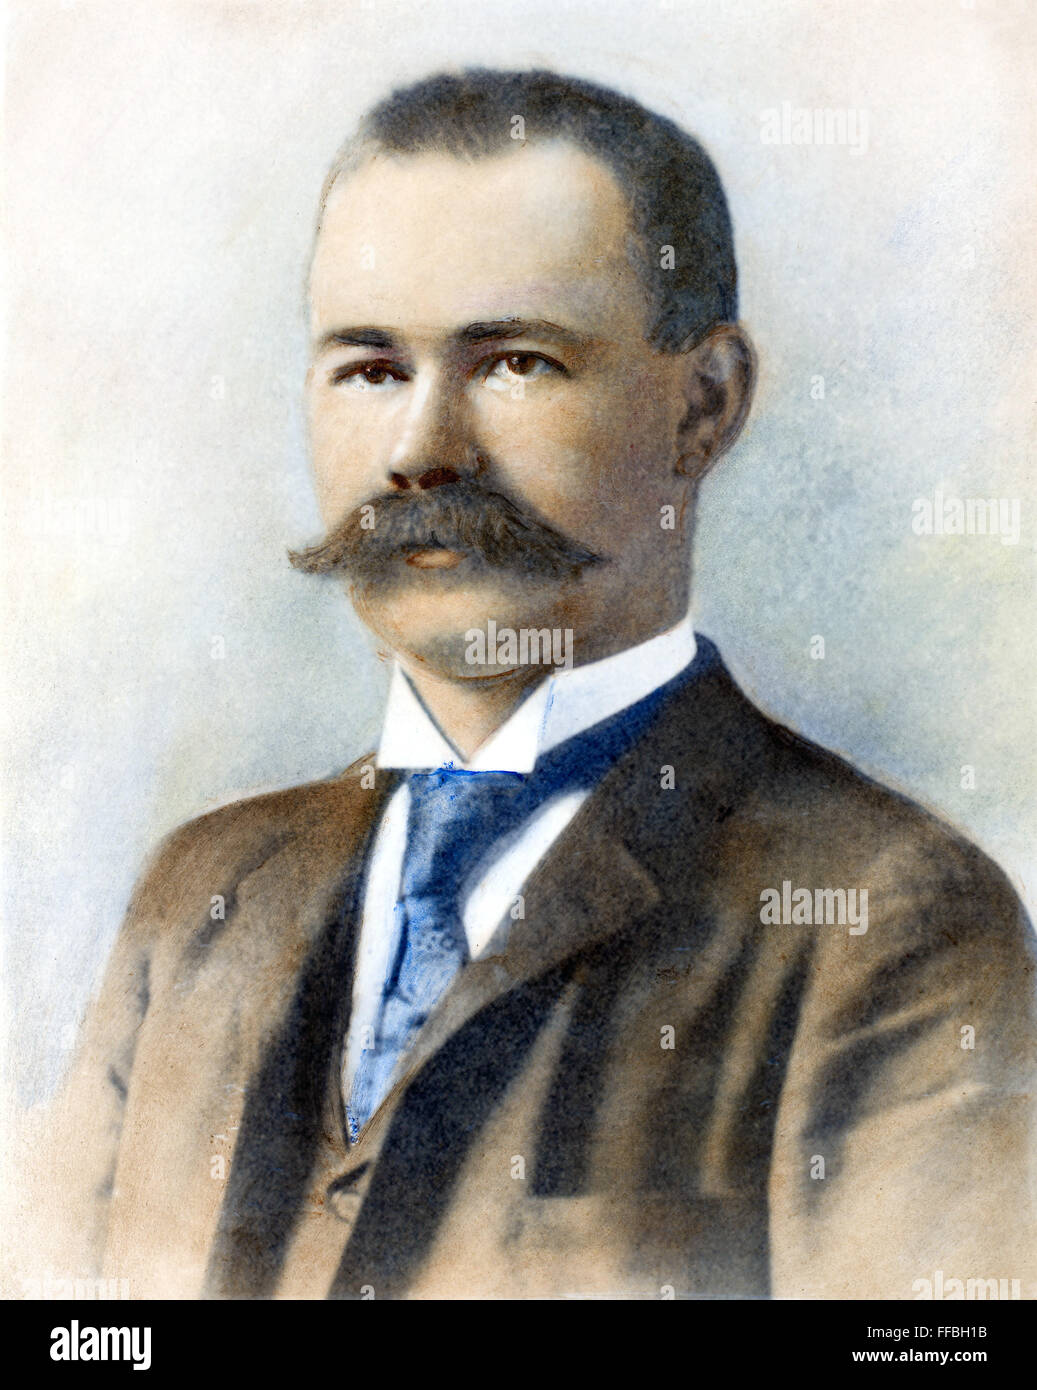 HERMAN HOLLERITH /n(1860-1929). American statistician and inventor. Oil over a photograph, c1890. Stock Photo